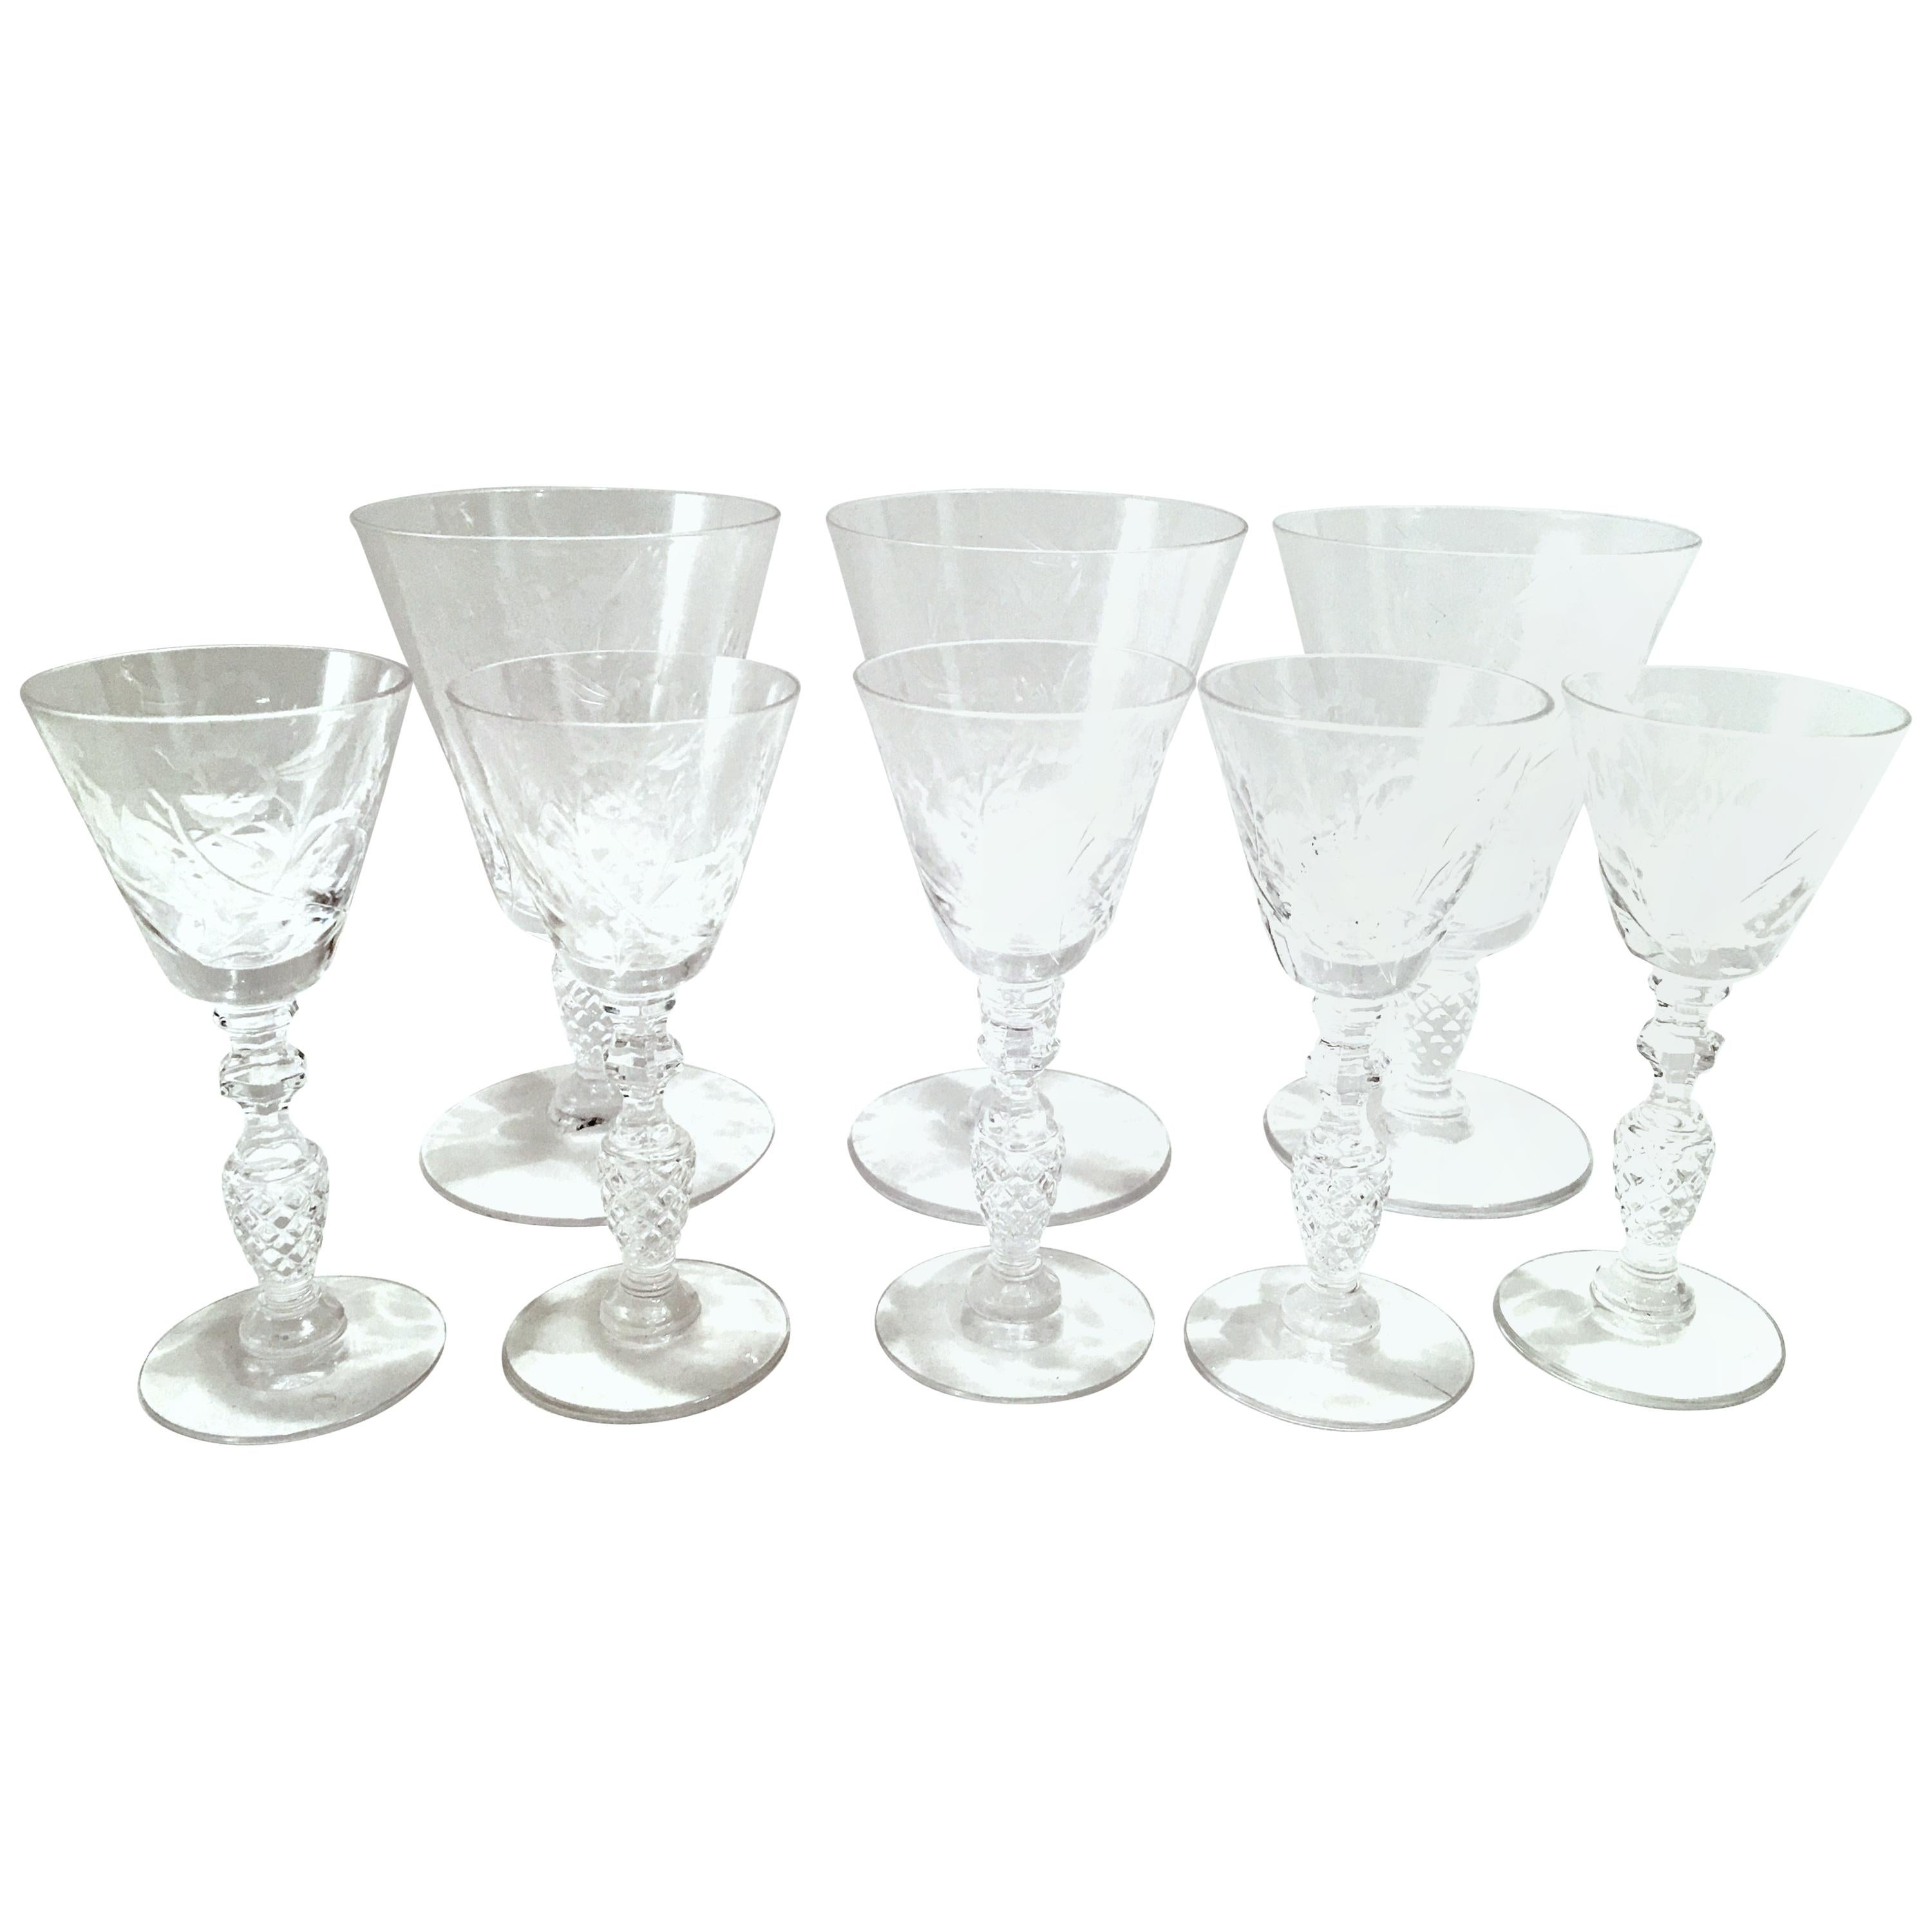 Mid-20th Century American Cut and Etched Crystal Stem Glasses S/8 For Sale